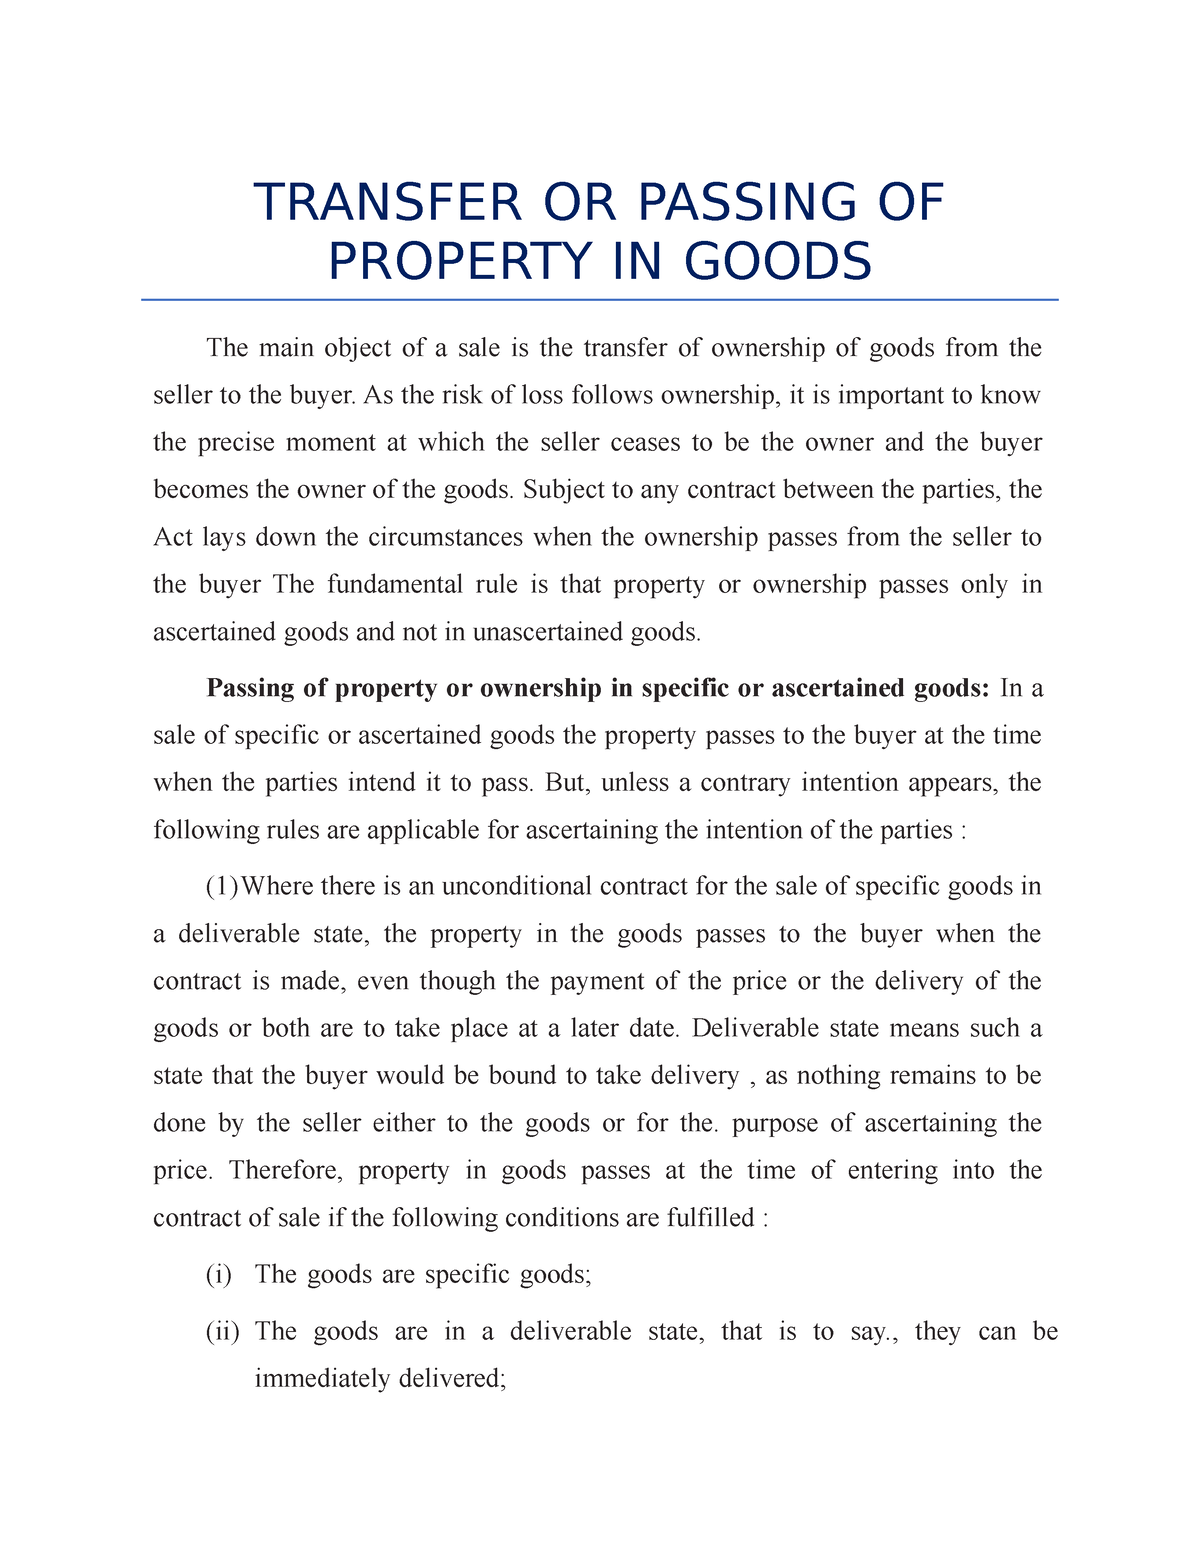 transfer of property in goods notes